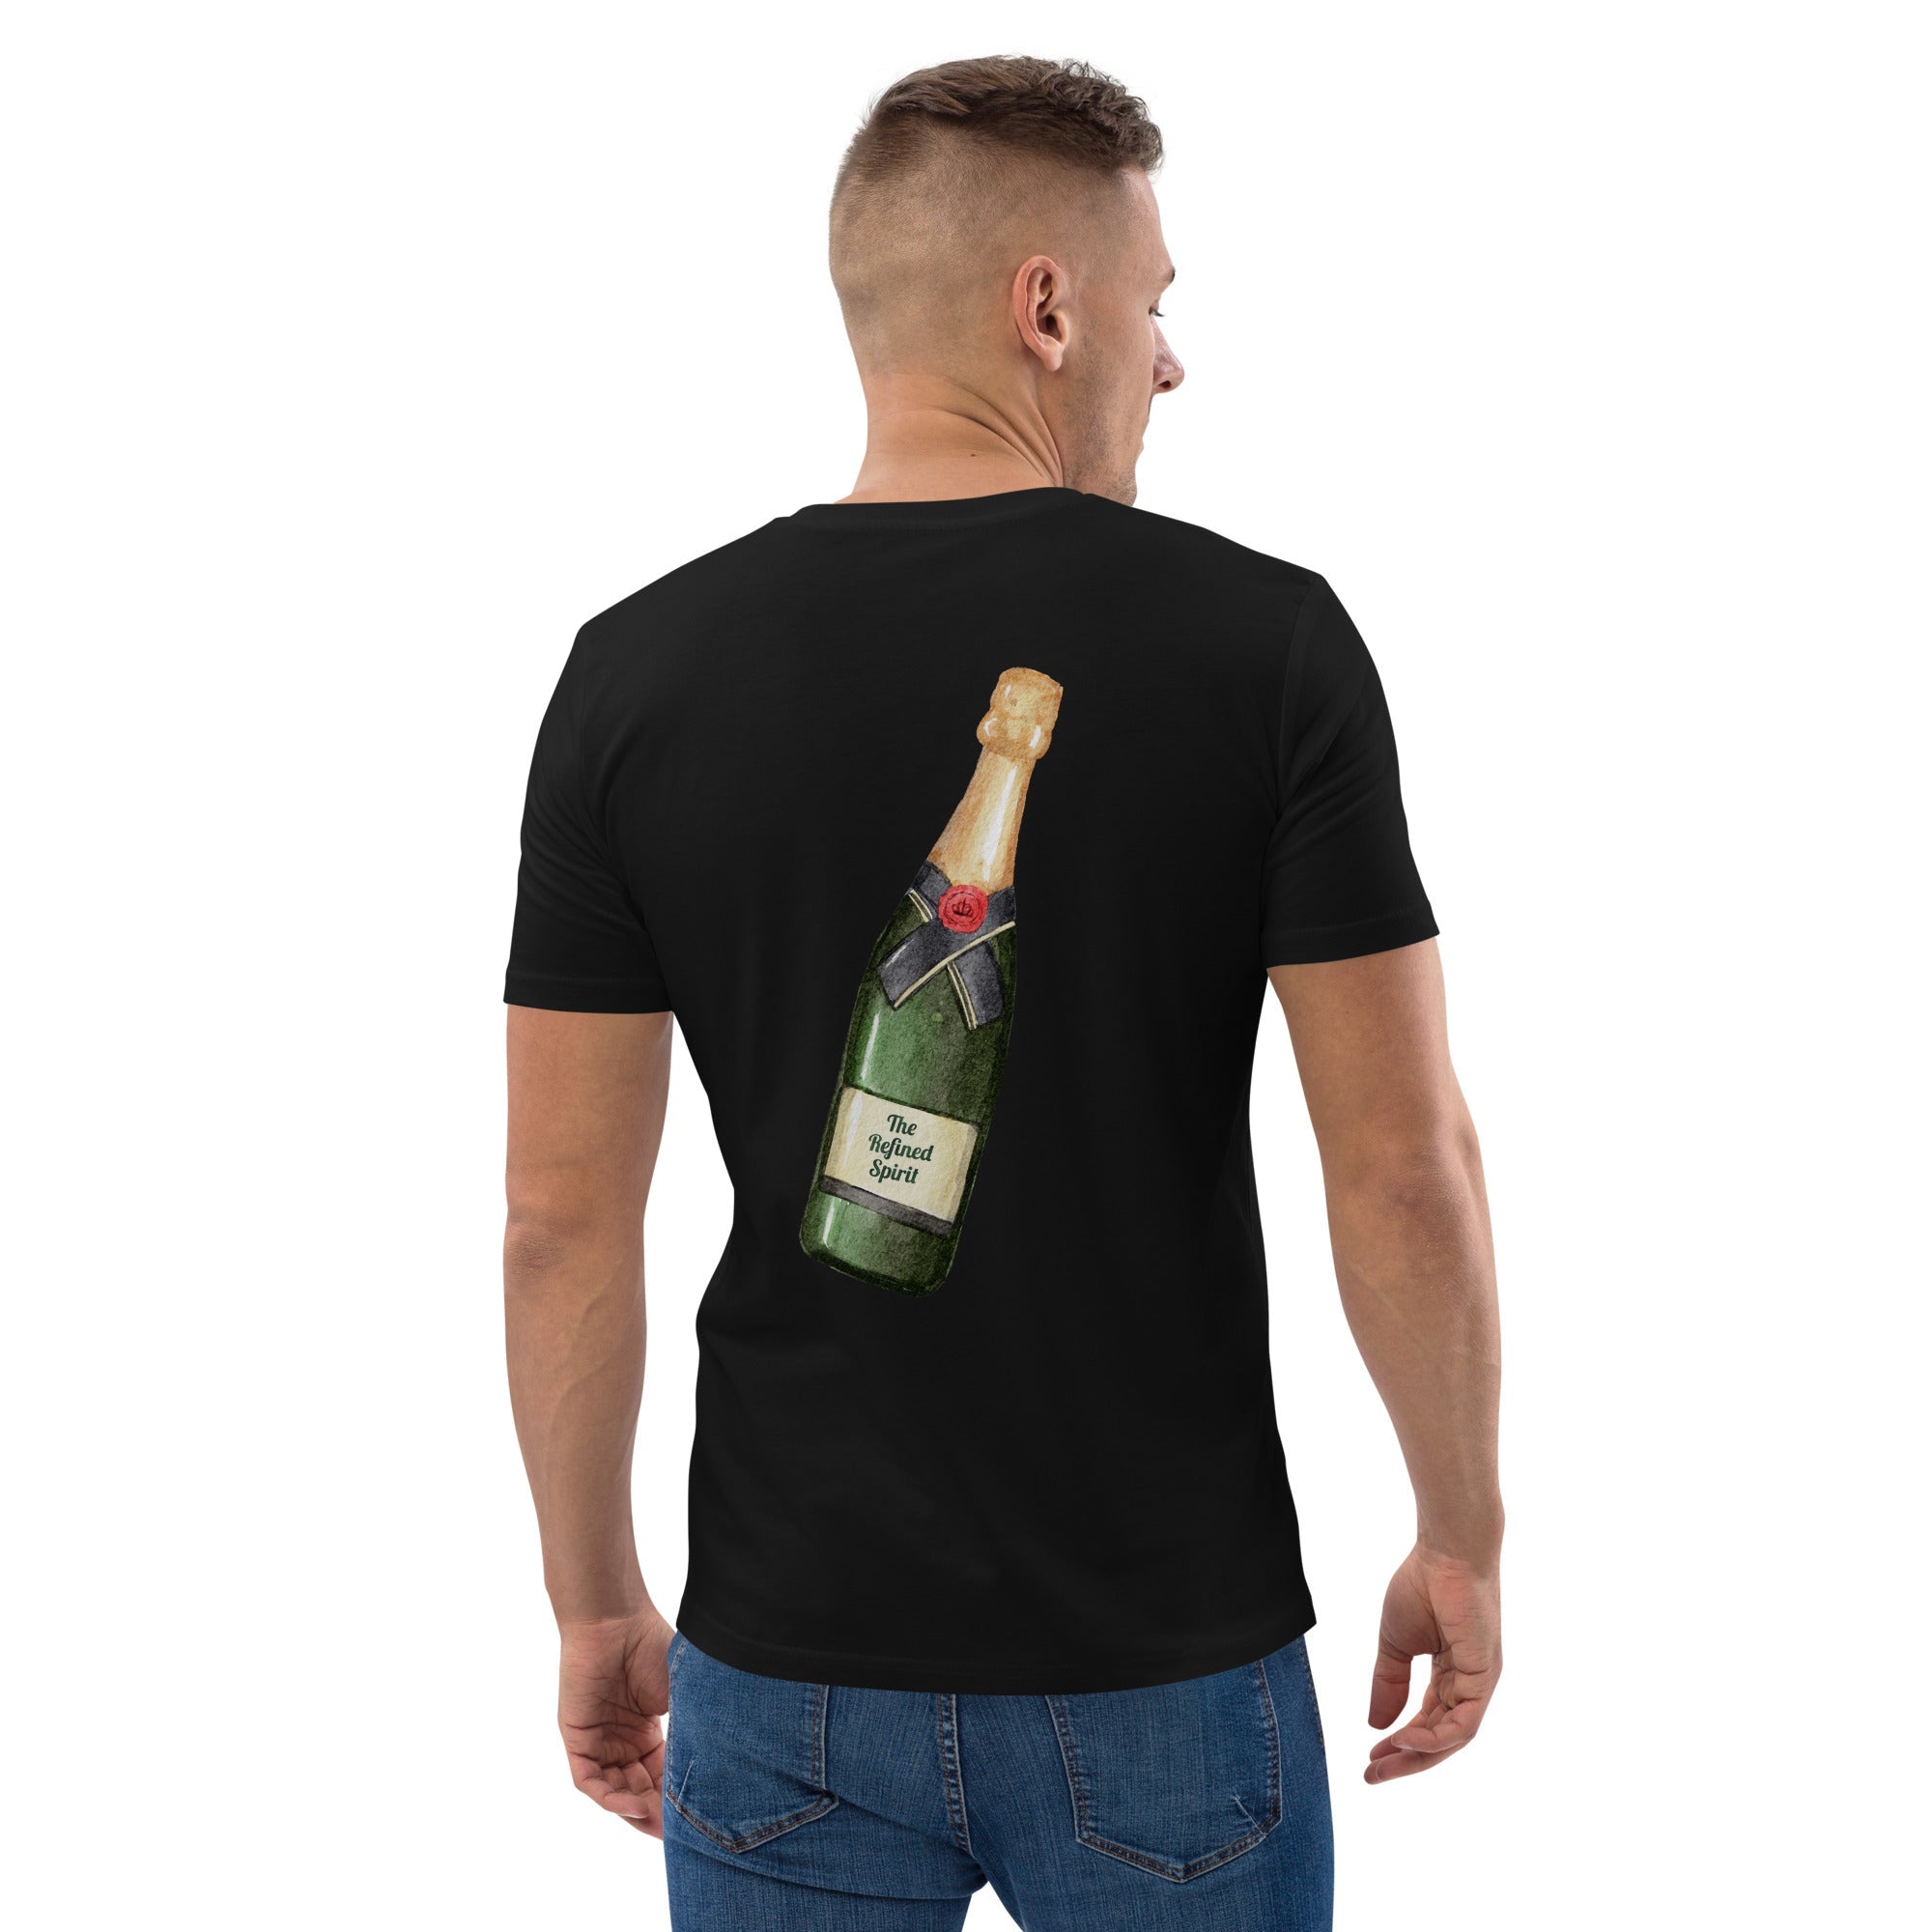 The Champagne Club - Organic Embroidered T-shirt - The Refined Spirit